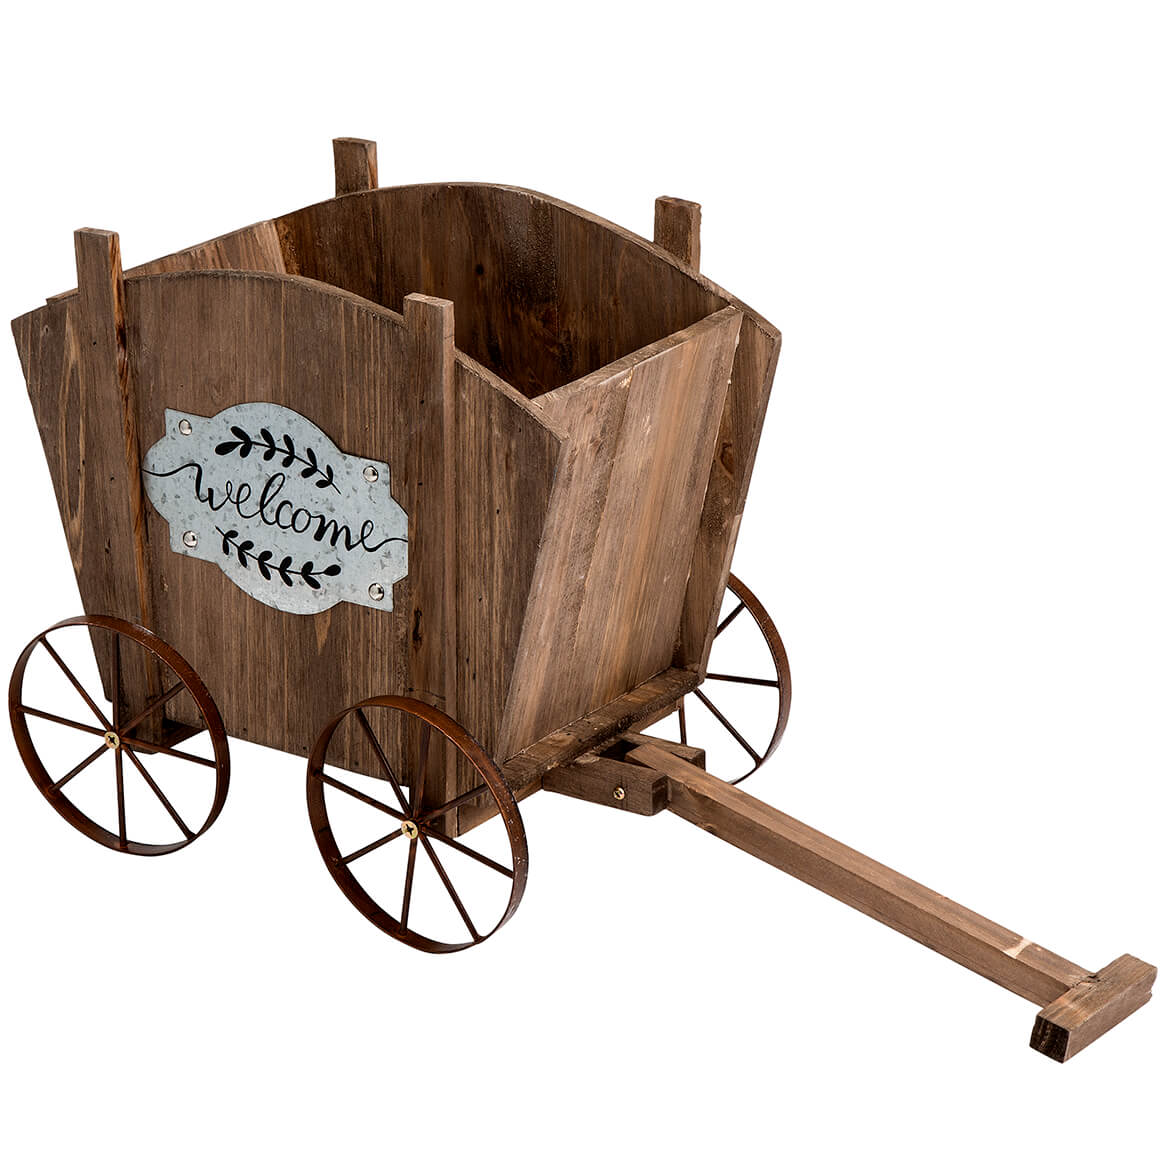 Welcome Wagon Wooden Planter Box, Amish Wagon Decorative Indoor/Outdoor Pla...